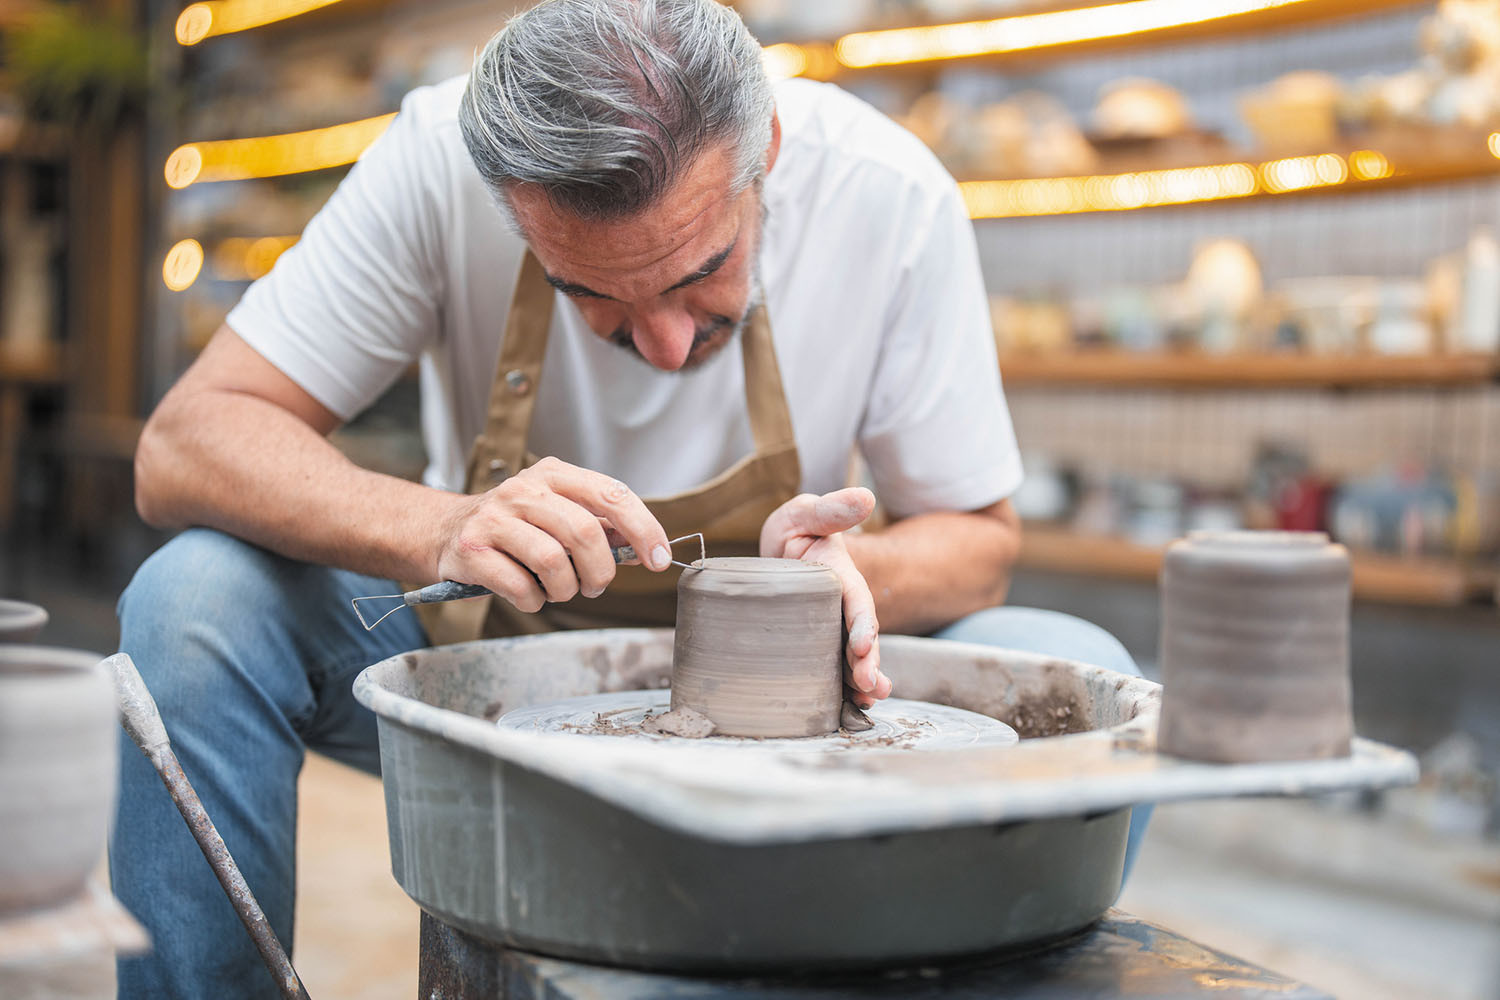 photo of a man bent over a pottery wheel as he uses a tool to shape the clay